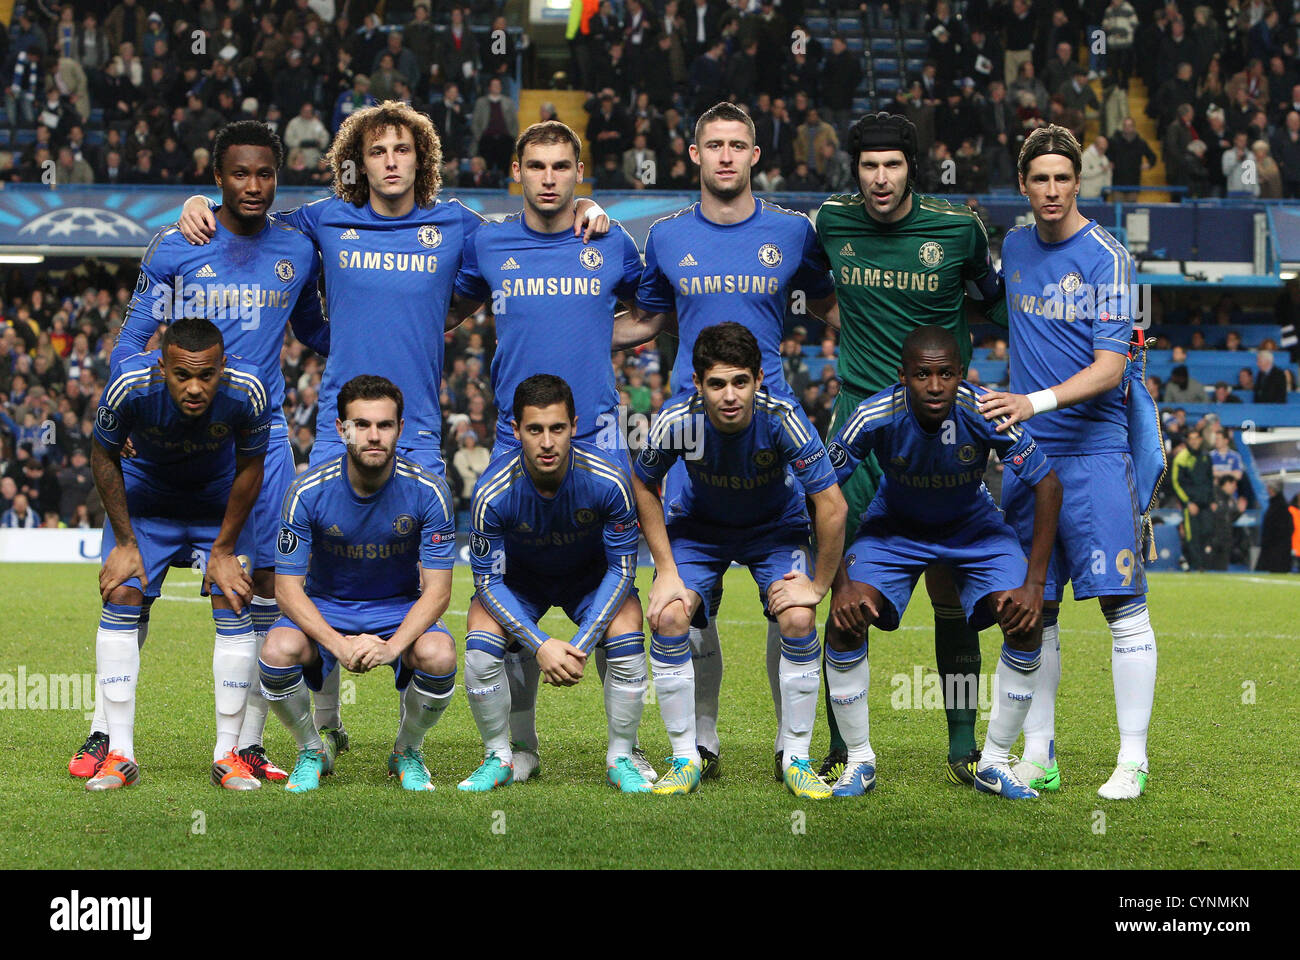 07.11.2012. London, England.  Chelsea Team before kick off the UEFA Champions League Group E game between Chelsea and Shakhtar Donetsk from Stamford Bridge Stock Photo